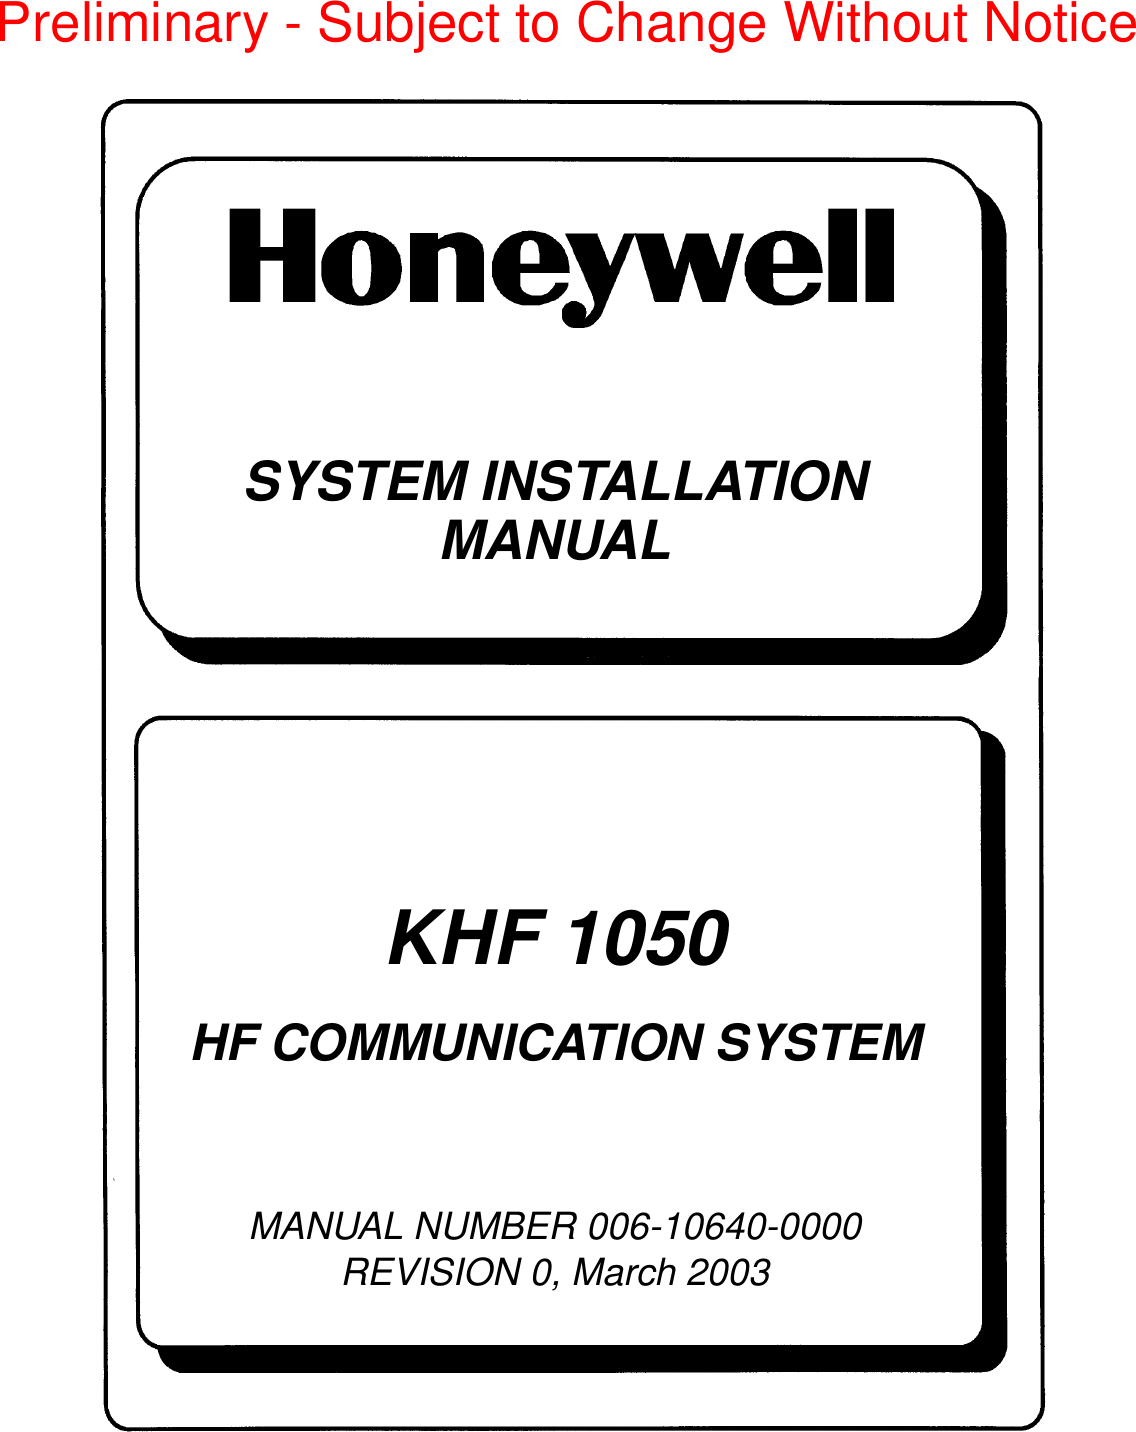 SYSTEM INSTALLATIONMANUALKHF 1050HF COMMUNICATION SYSTEMMANUAL NUMBER 006-10640-0000REVISION 0, March 2003Preliminary - Subject to Change Without Notice